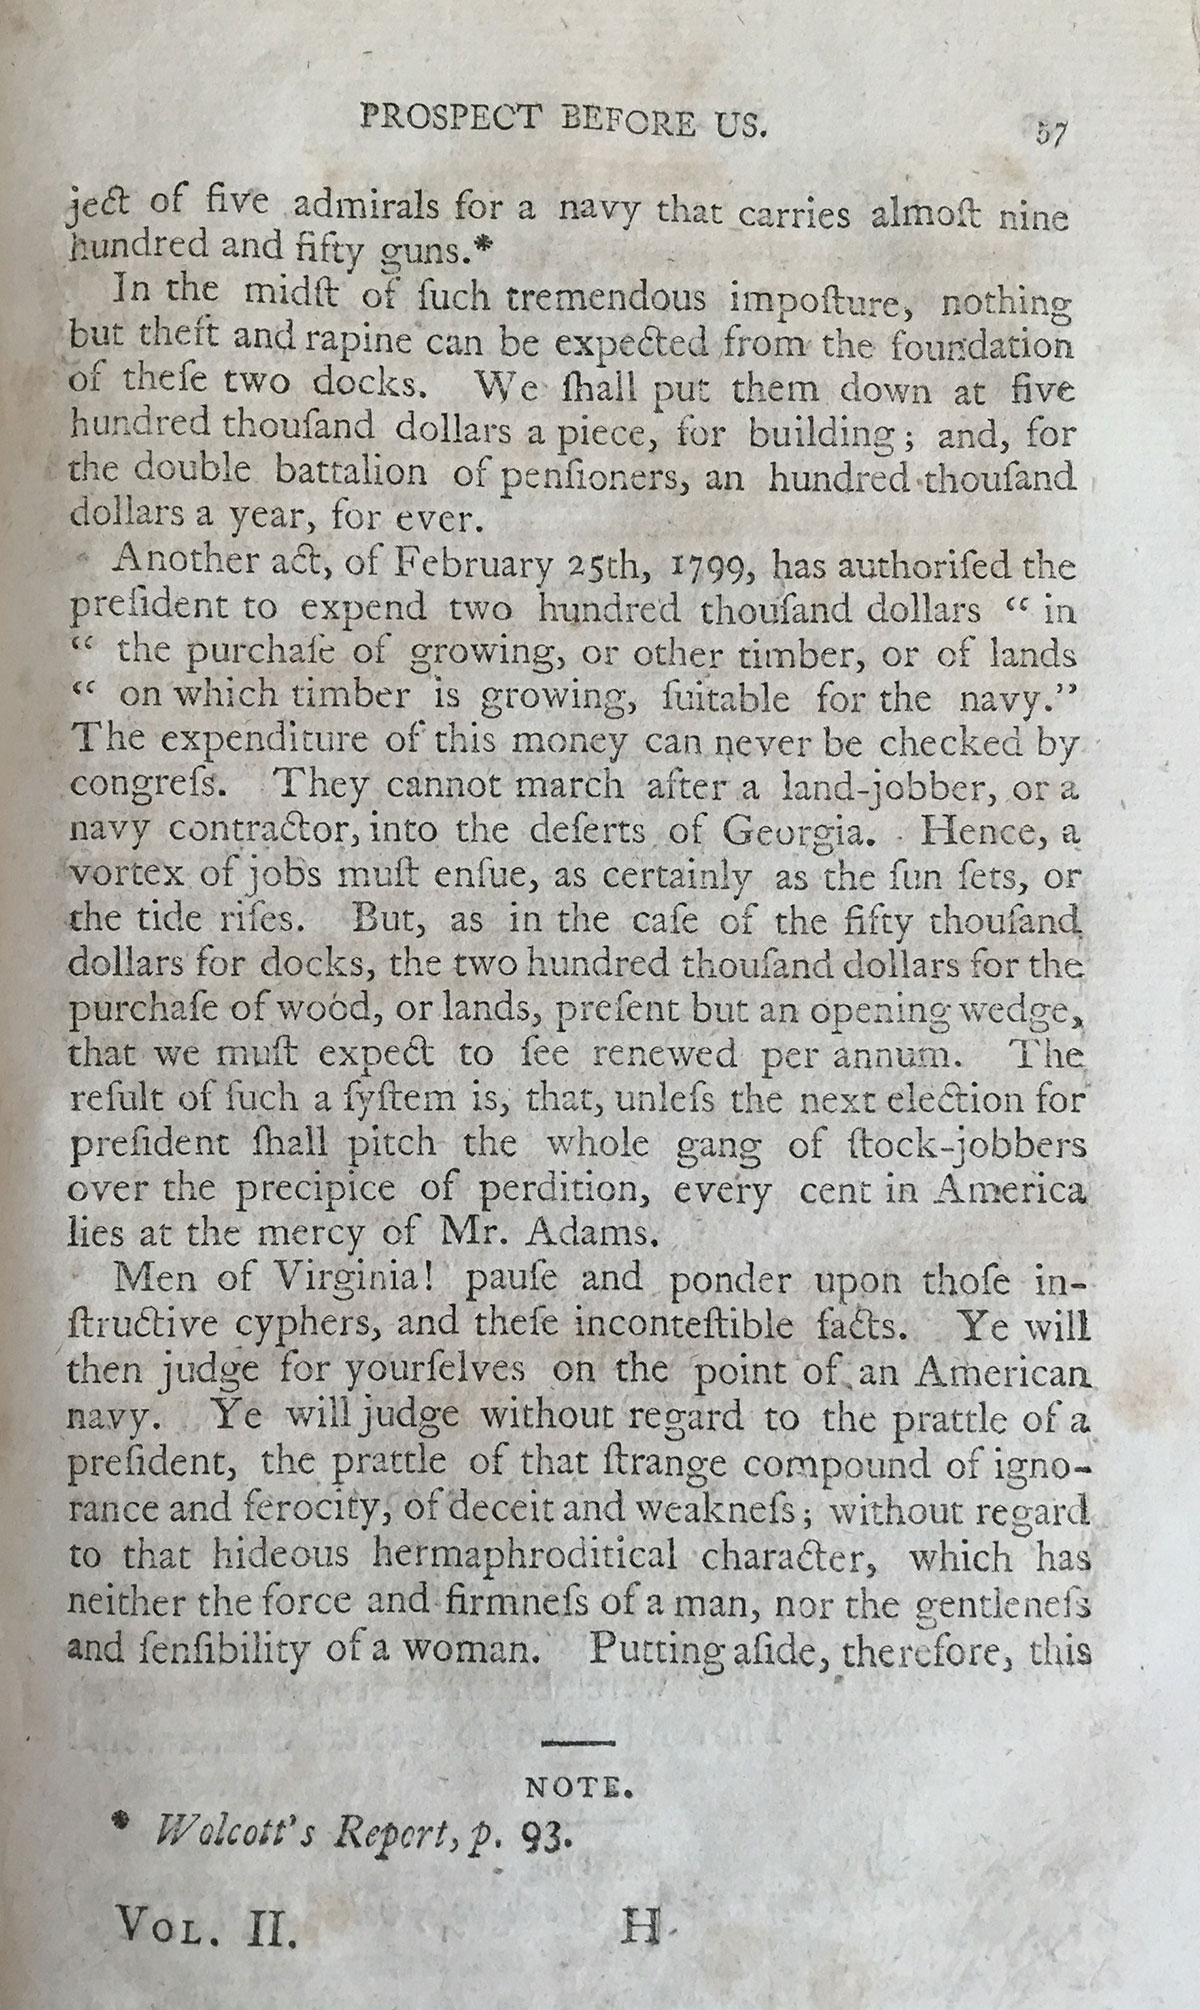 Page 57, Volume 2 of The Prospect Before Us